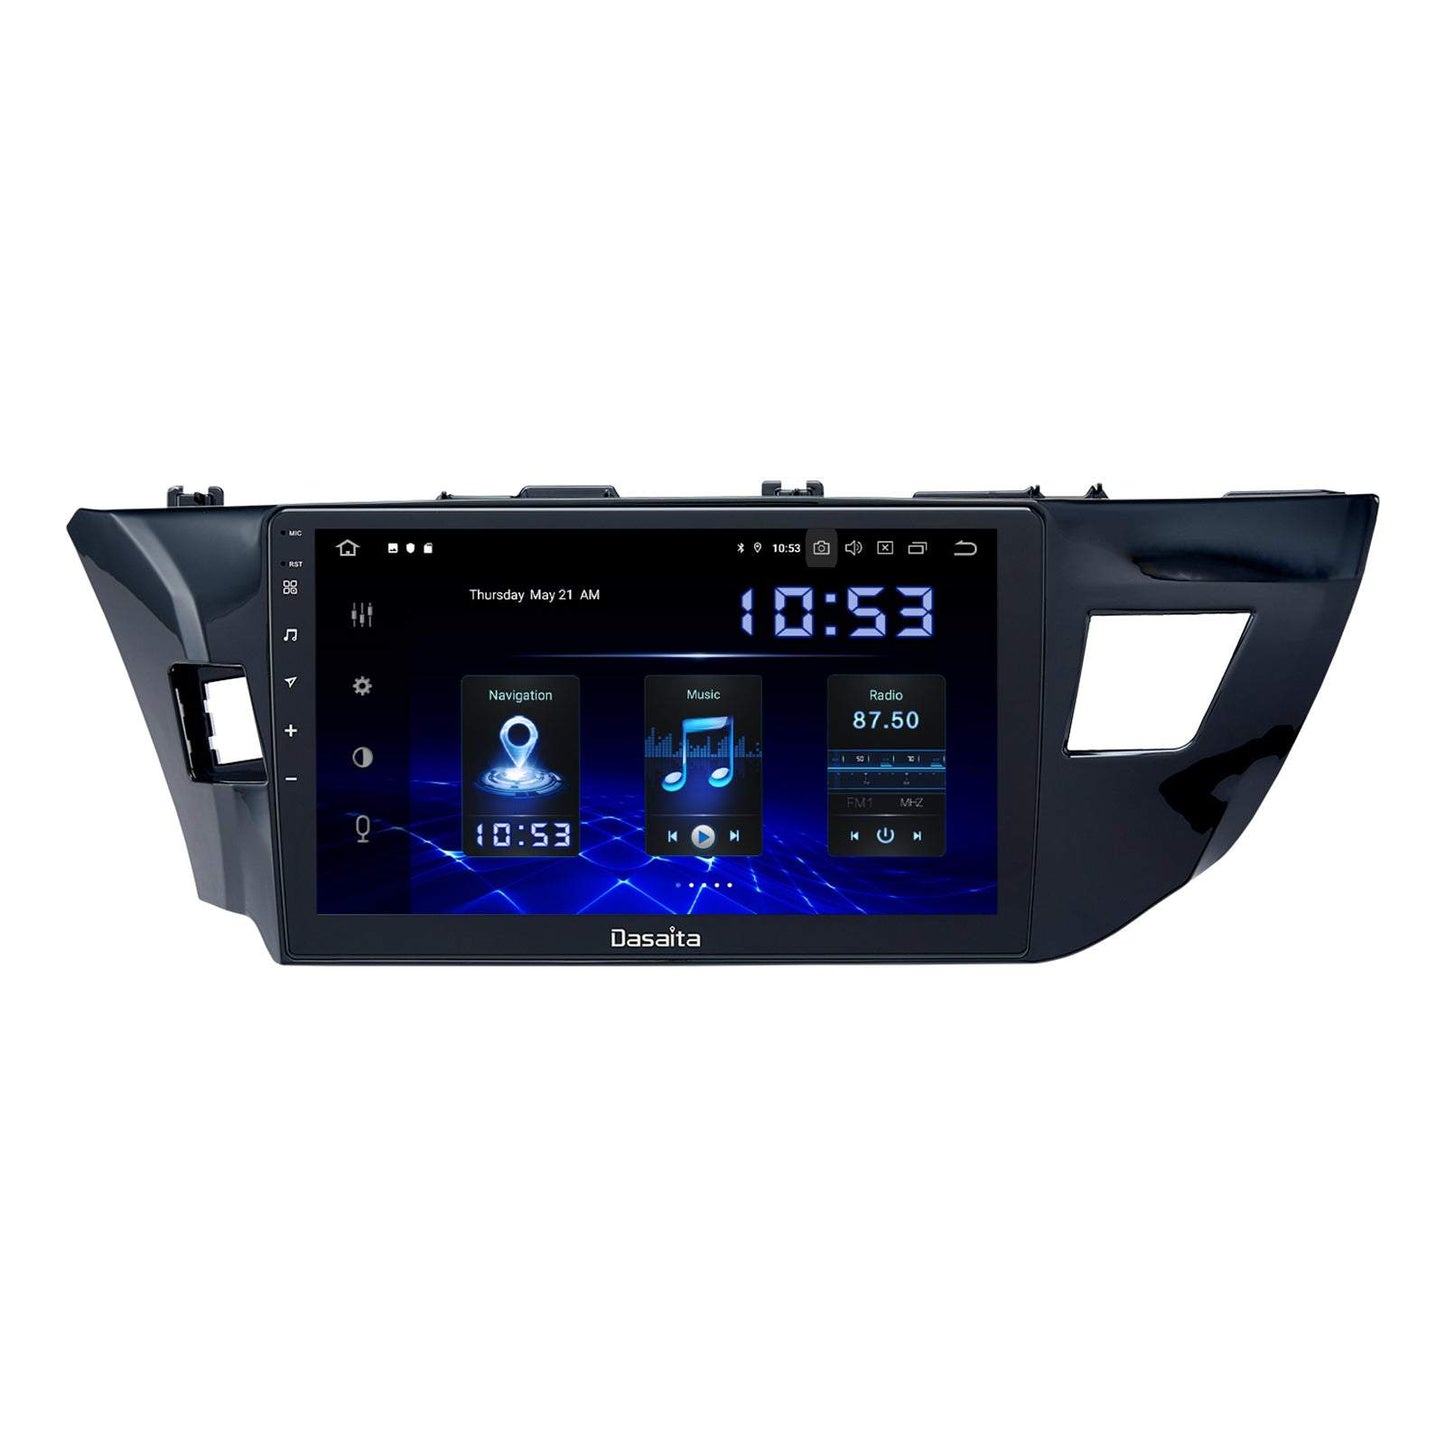 Dasaita (Outlets) W11 Toyota Corolla 2014 2015 2016 Car Stereo 9 Inch PX4 2G+32G Android11 1024*600 DSP AHD Radio